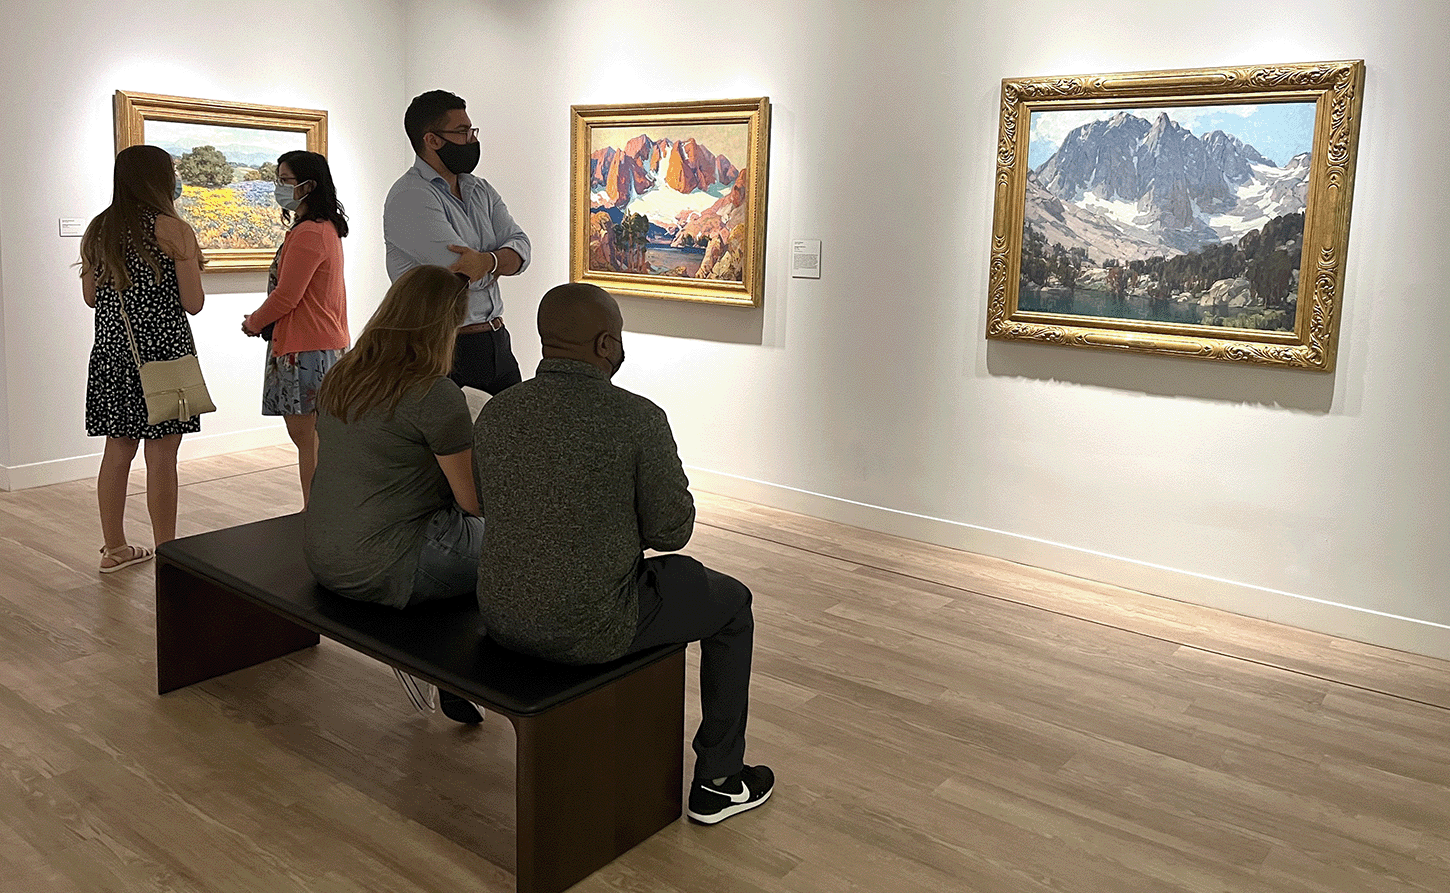 Installation view with visitors, <em>Variations of Place: Southern California Impressionism in the Early 20th Century</em>, 2022, Photo by Julie Delliquanti © The Regents of the University of California